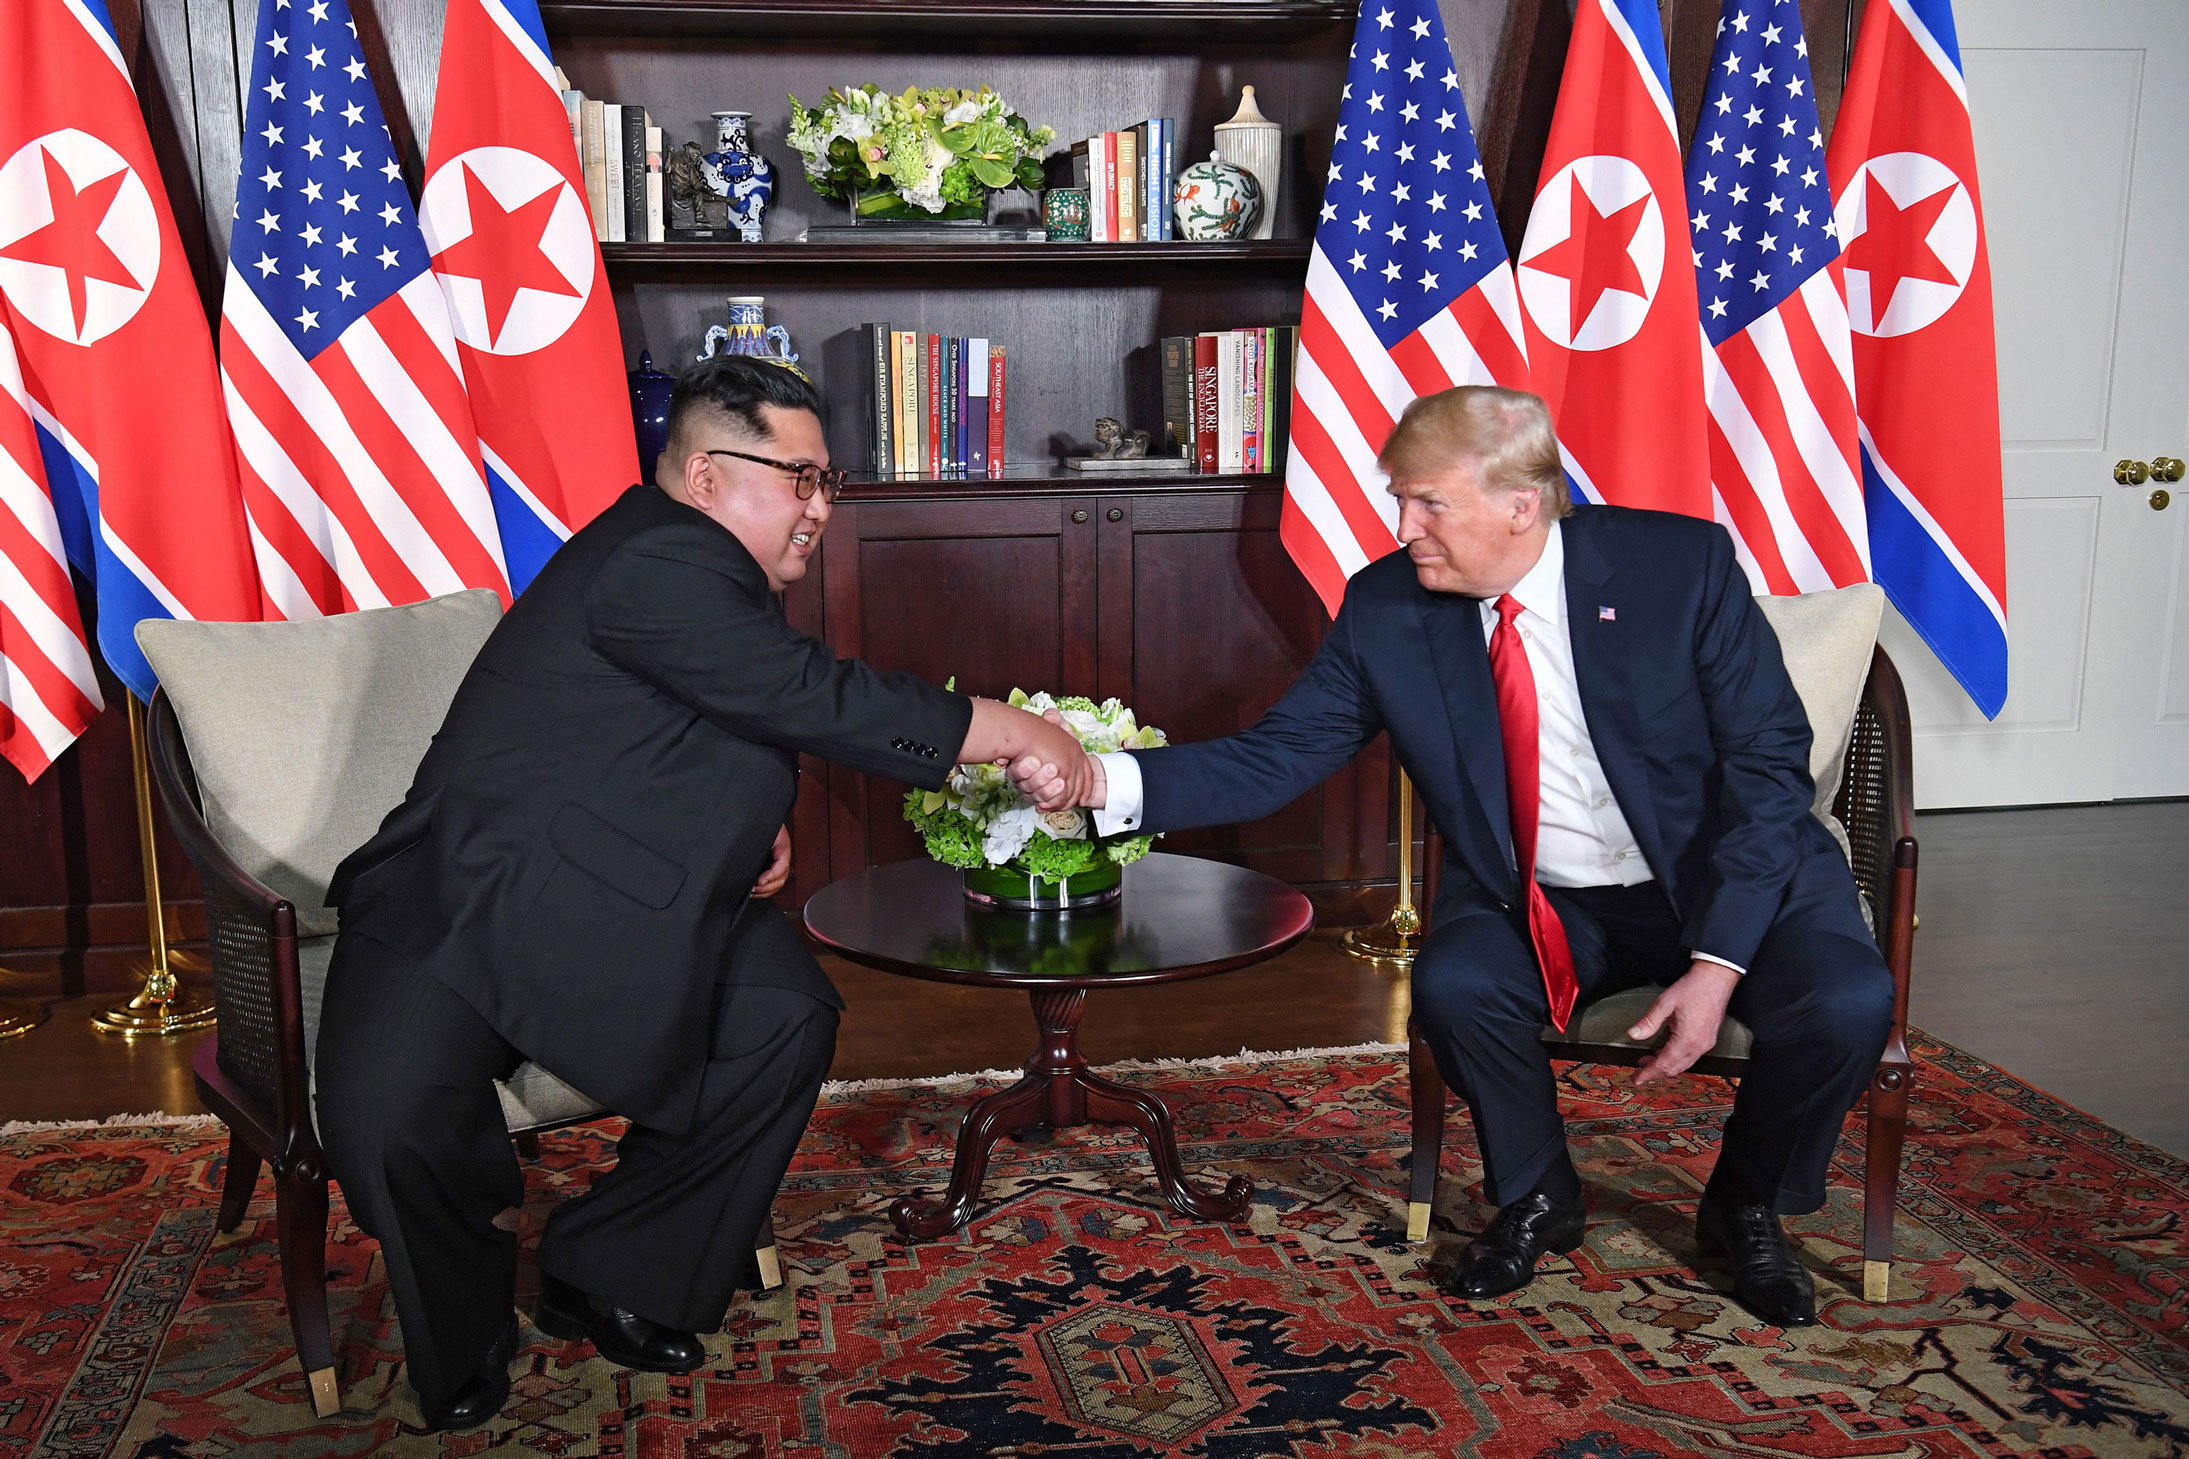 US President Donald Trump (R) shakes hands with North Korea's leader Kim Jong Un (L) as they sit down for their historic US-North Korea summit, at the Capella Hotel on Sentosa island in Singapore on June 12, 2018.